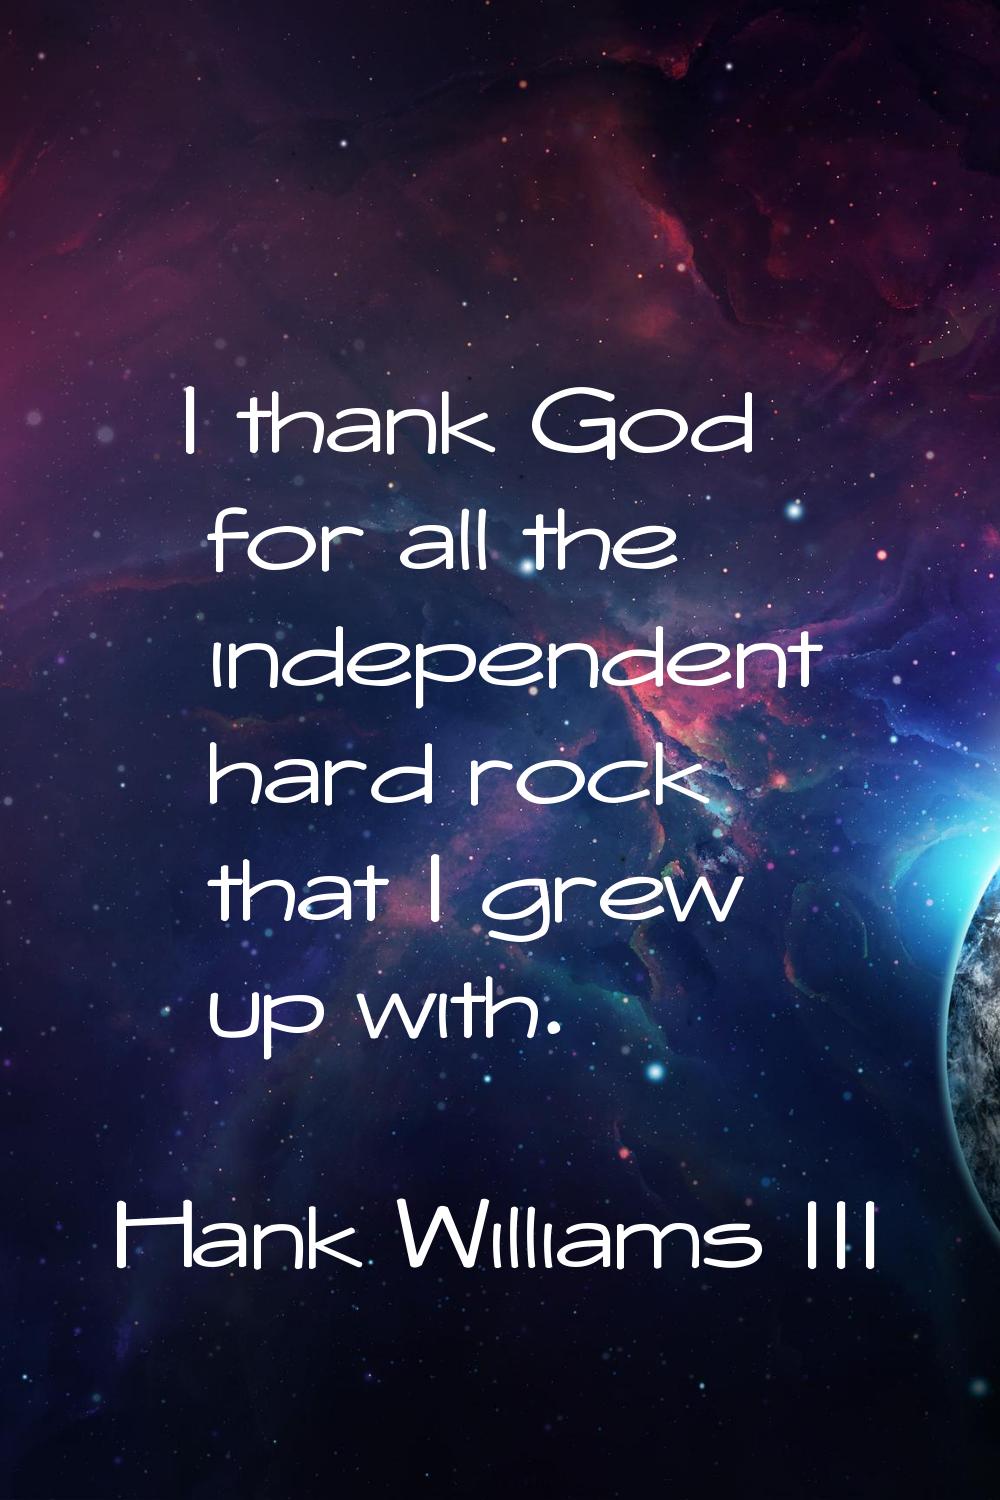 I thank God for all the independent hard rock that I grew up with.